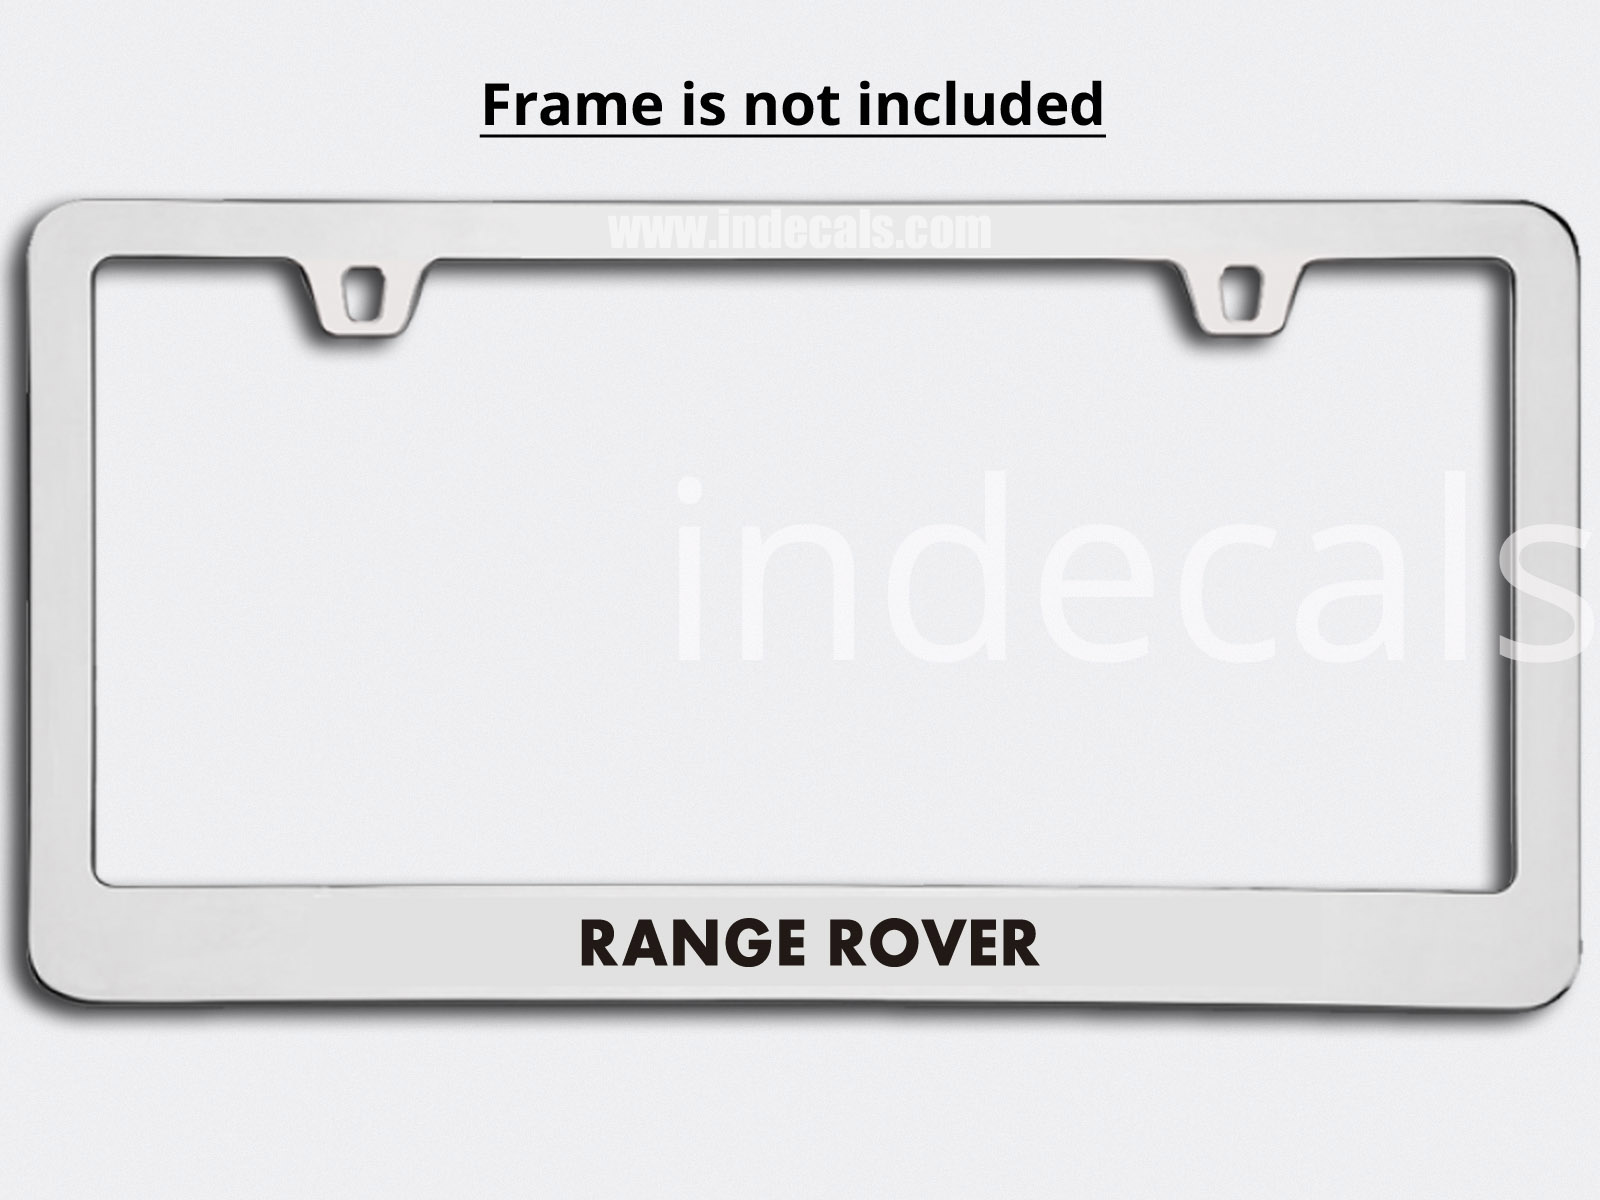 3 x Range Rover Stickers for Plate Frame - Black